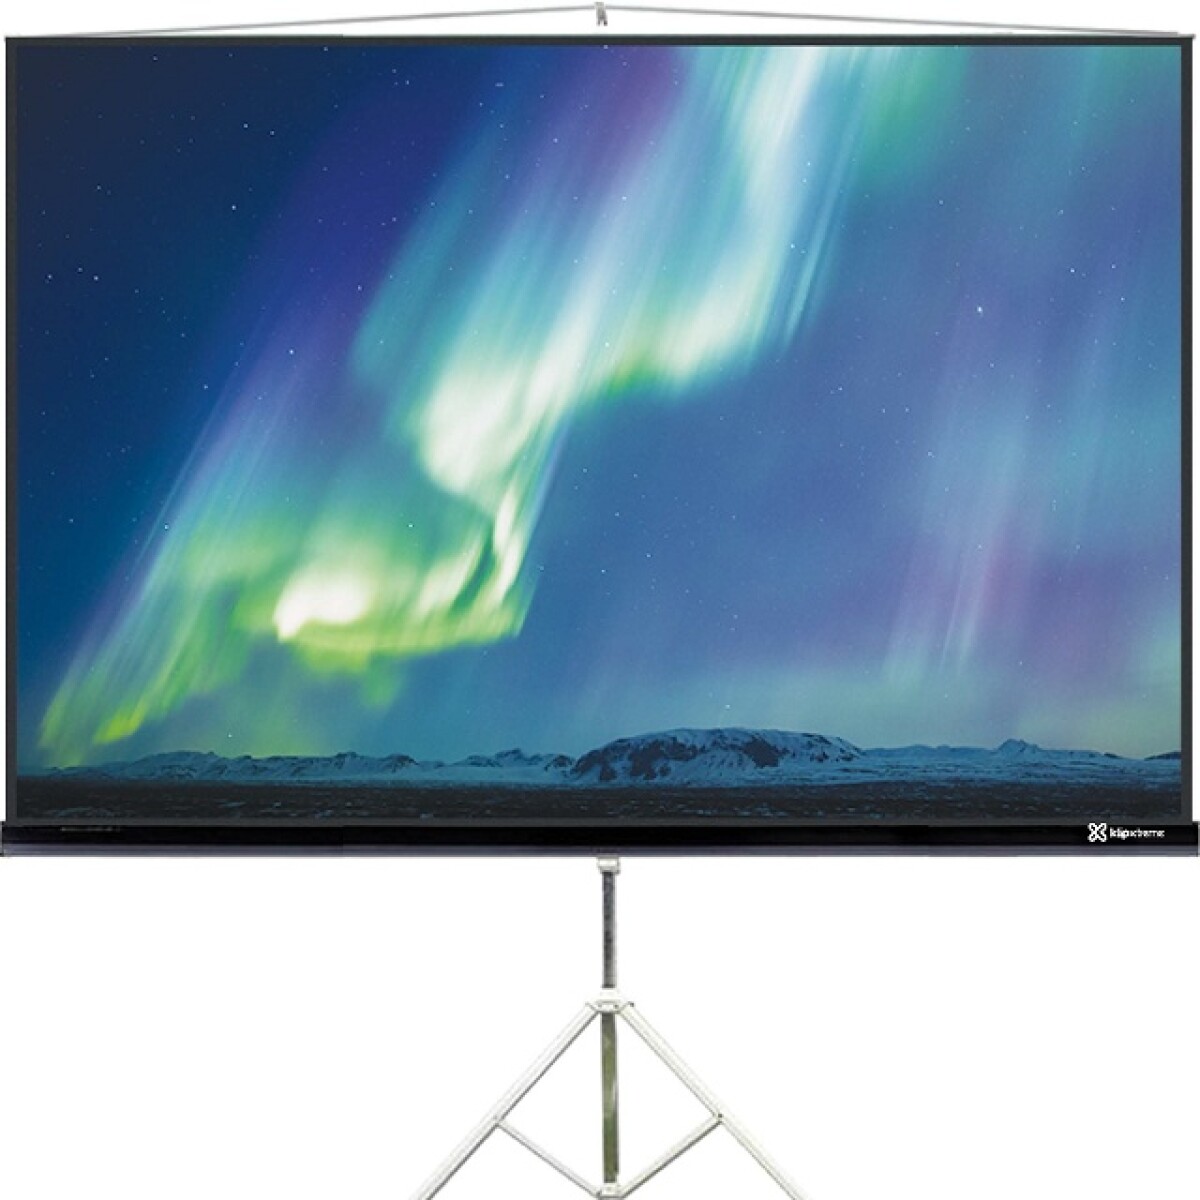 Klip Xtreme KPS-113 - Projection screen with tripod - 92" - 16:9 